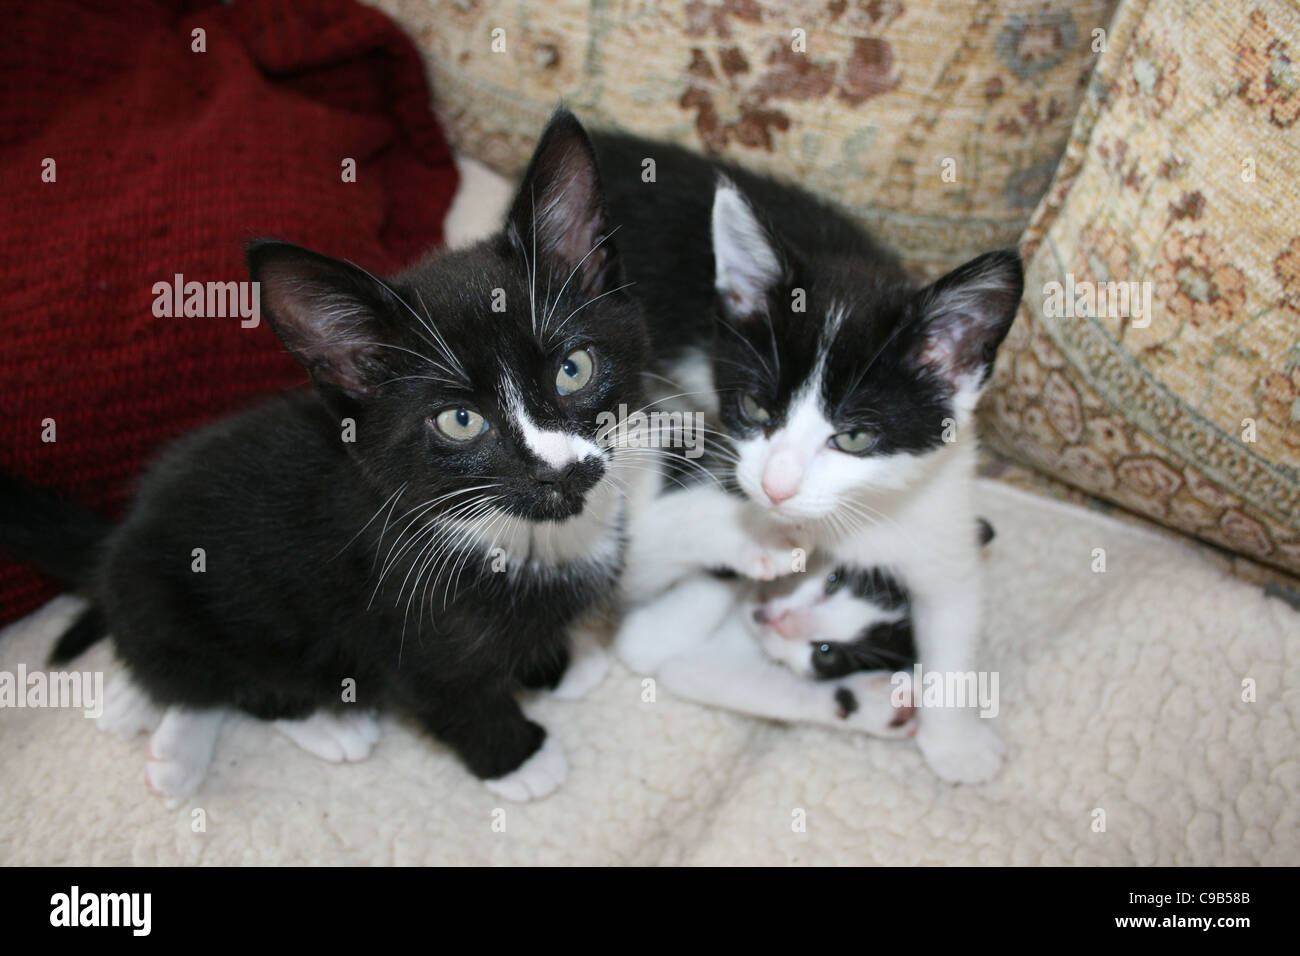 Black and white kittens one kitten peeping from under one of them on white fleece on sofa with red cushions. Stock Photo